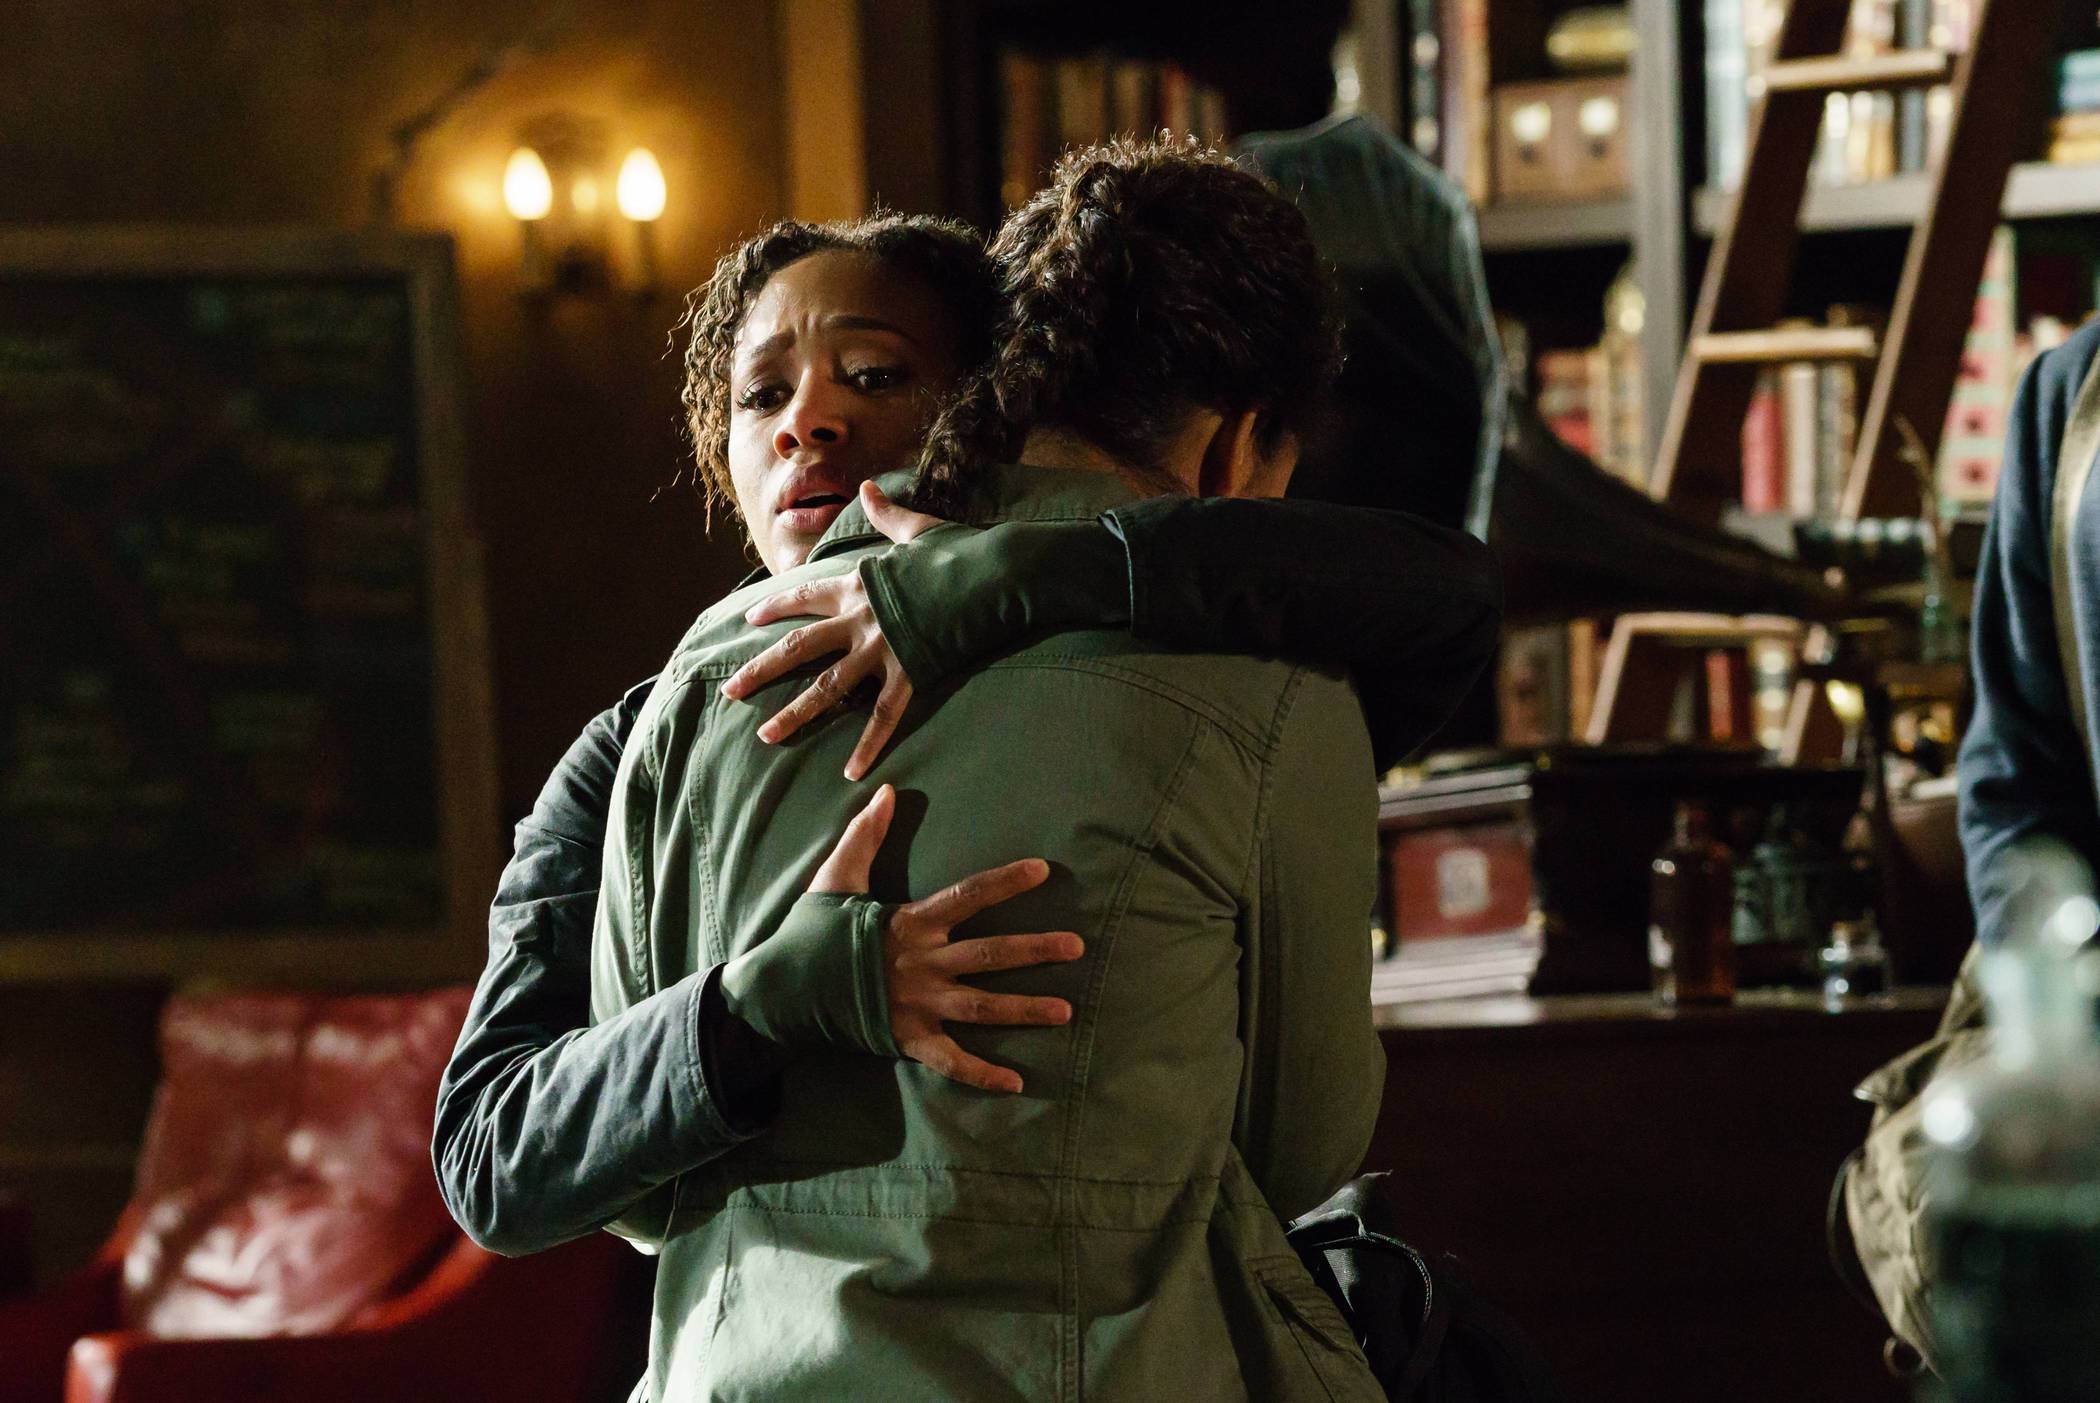 SLEEPY HOLLOW: L-R: Nicole Beharie and Lyndie Greenwood in theÒRagnarokÓ season finale episode of SLEEPY HOLLOW airing Friday, April 8 (8:00-9:00 PM ET/PT) on FOX. ©2016 Fox Broadcasting Co. Cr: Tina Rowden/FOX